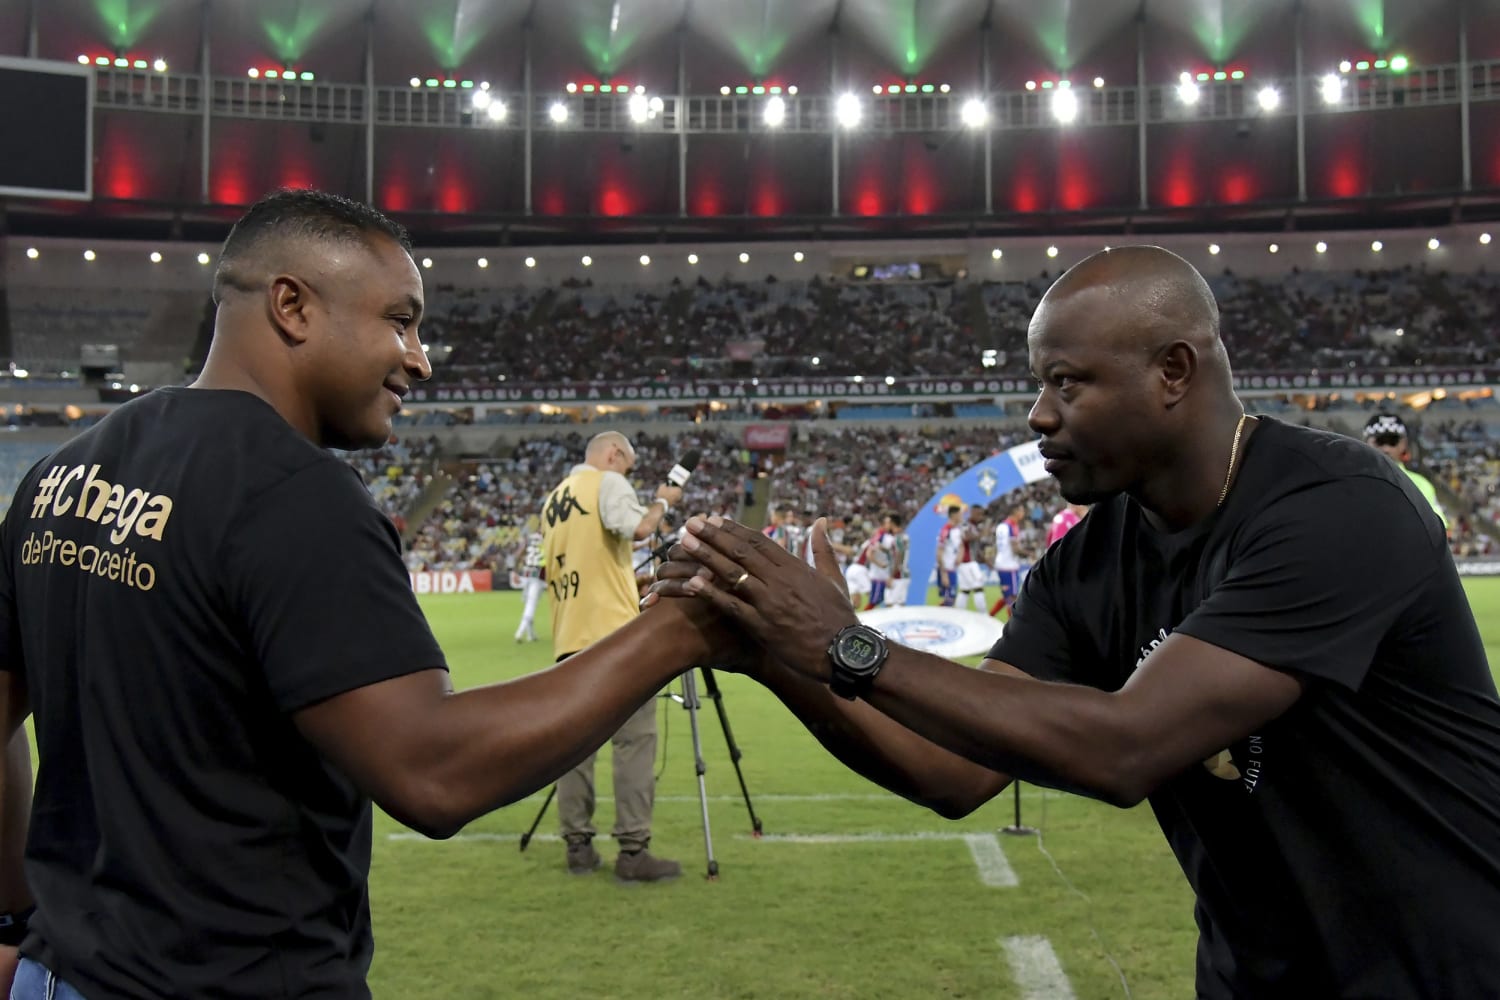 The only two black coaches in Brazil's top 20 soccer teams join forces to  protest ongoing racism